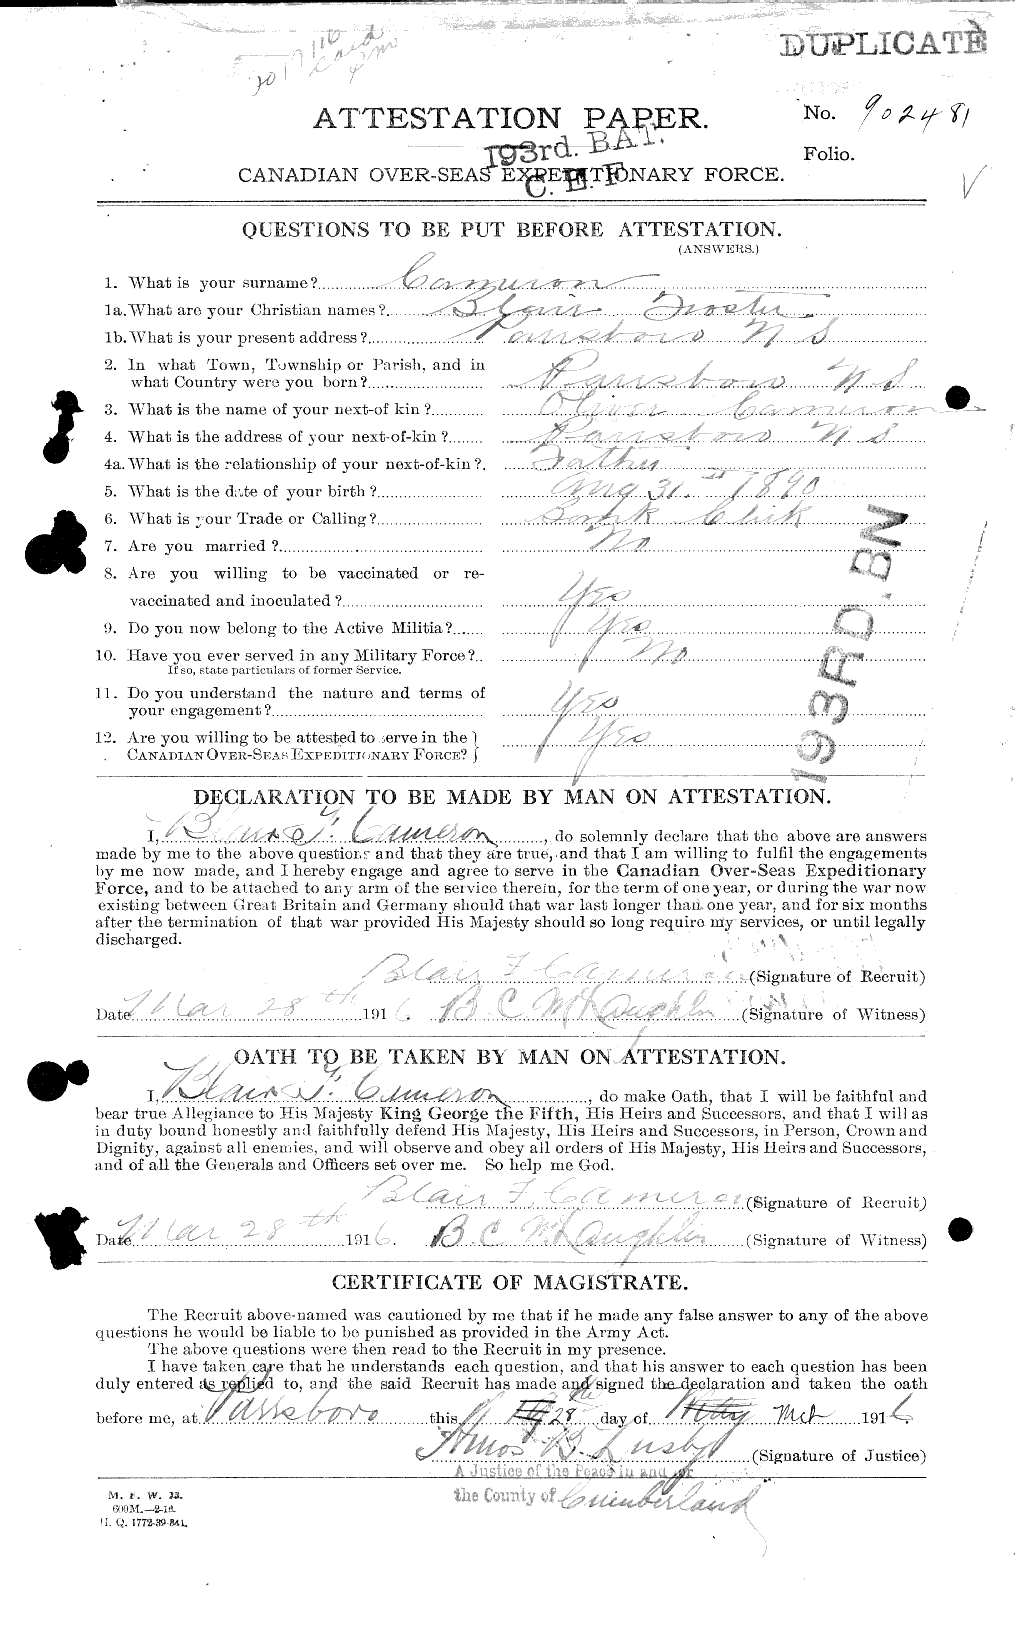 Personnel Records of the First World War - CEF 002583a